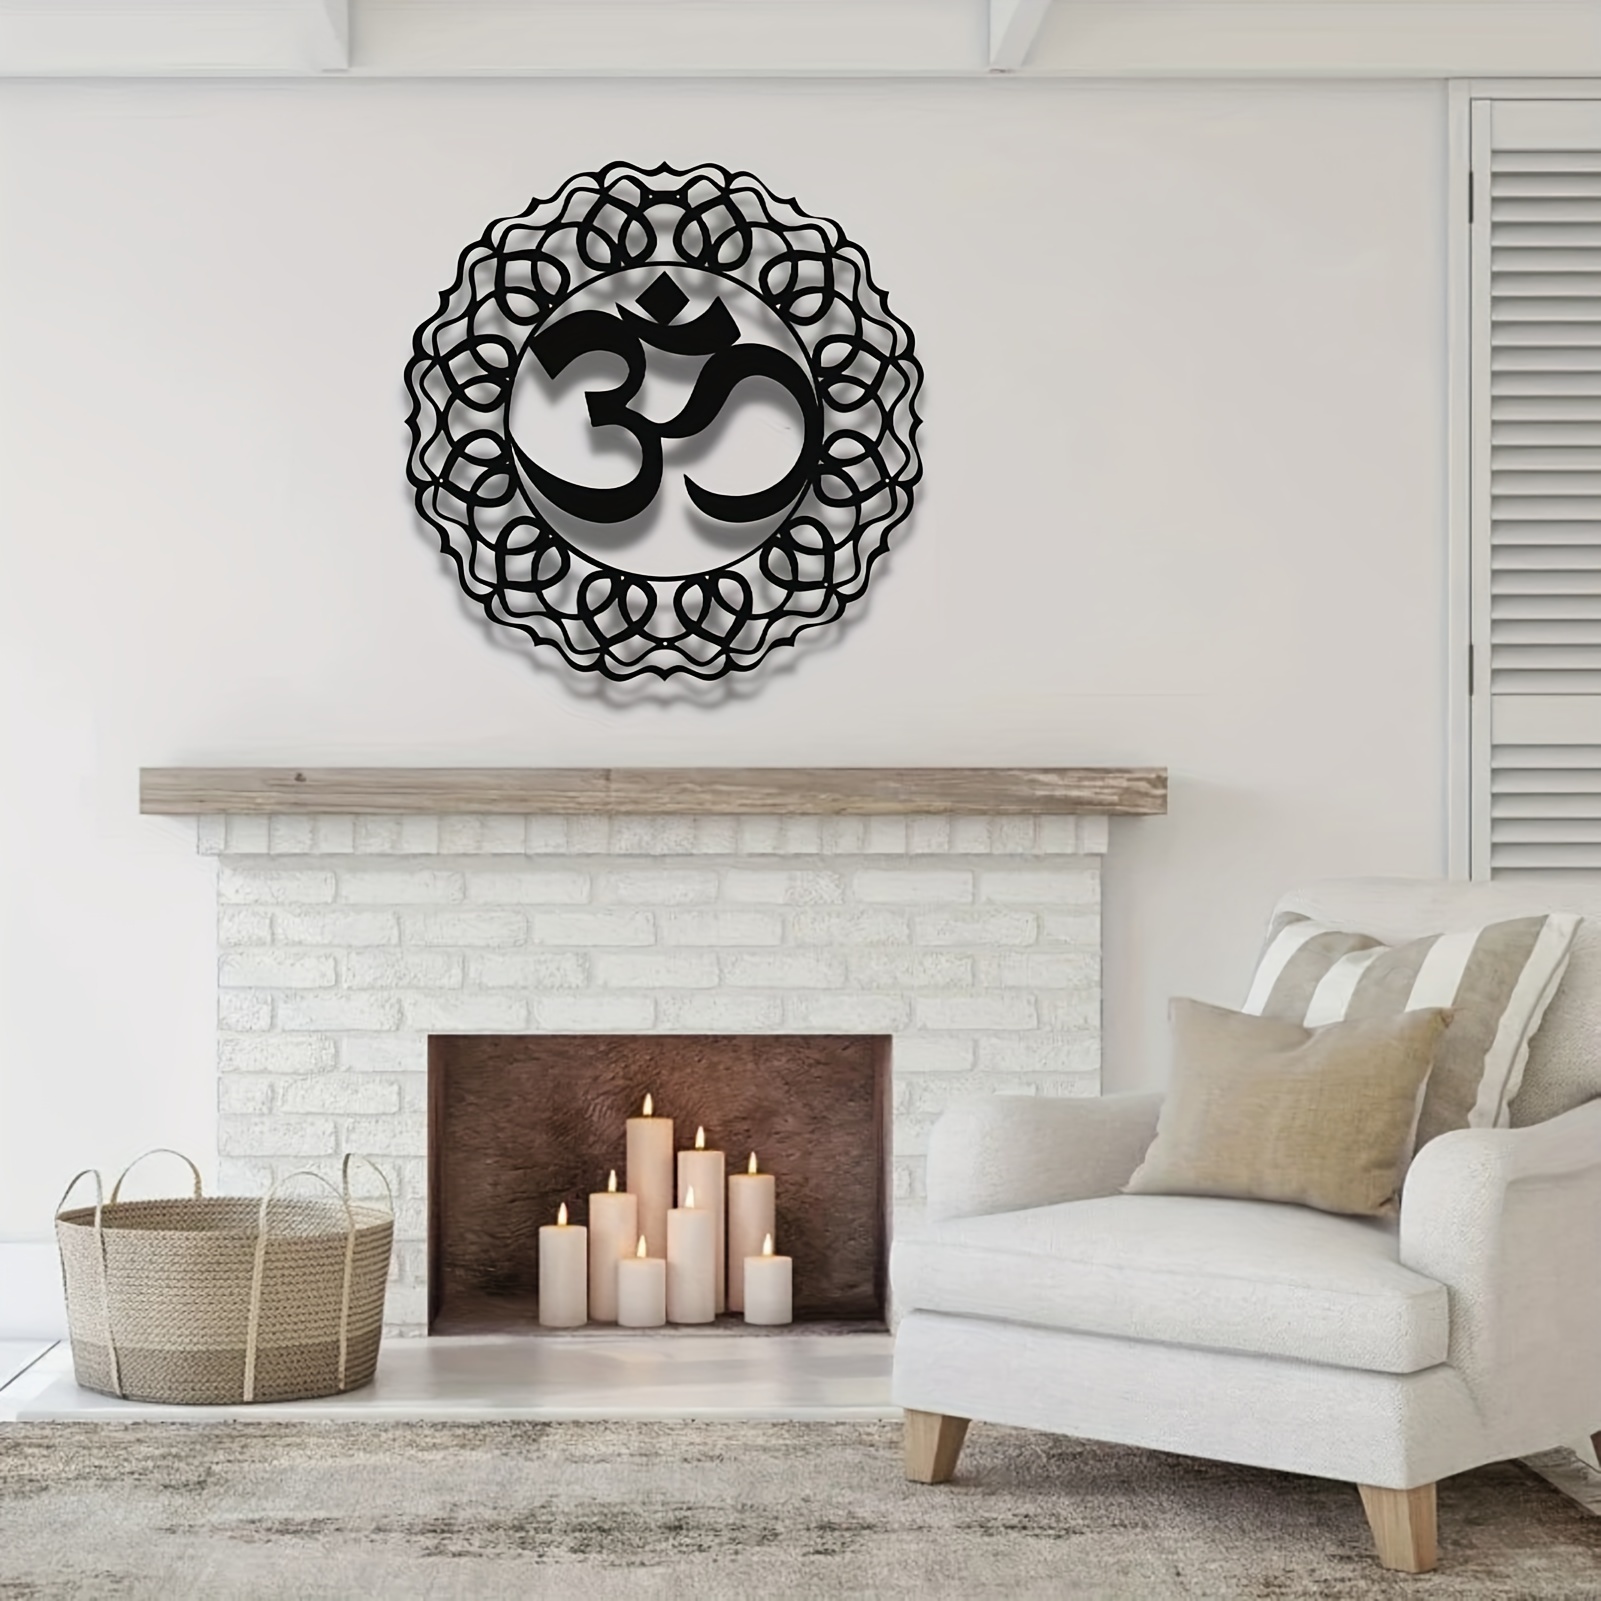 Fire Circle Canvas Wall Art, Canvas and Wall Art, Mandala Wall Art Decor,  Office Wall Art Decor 